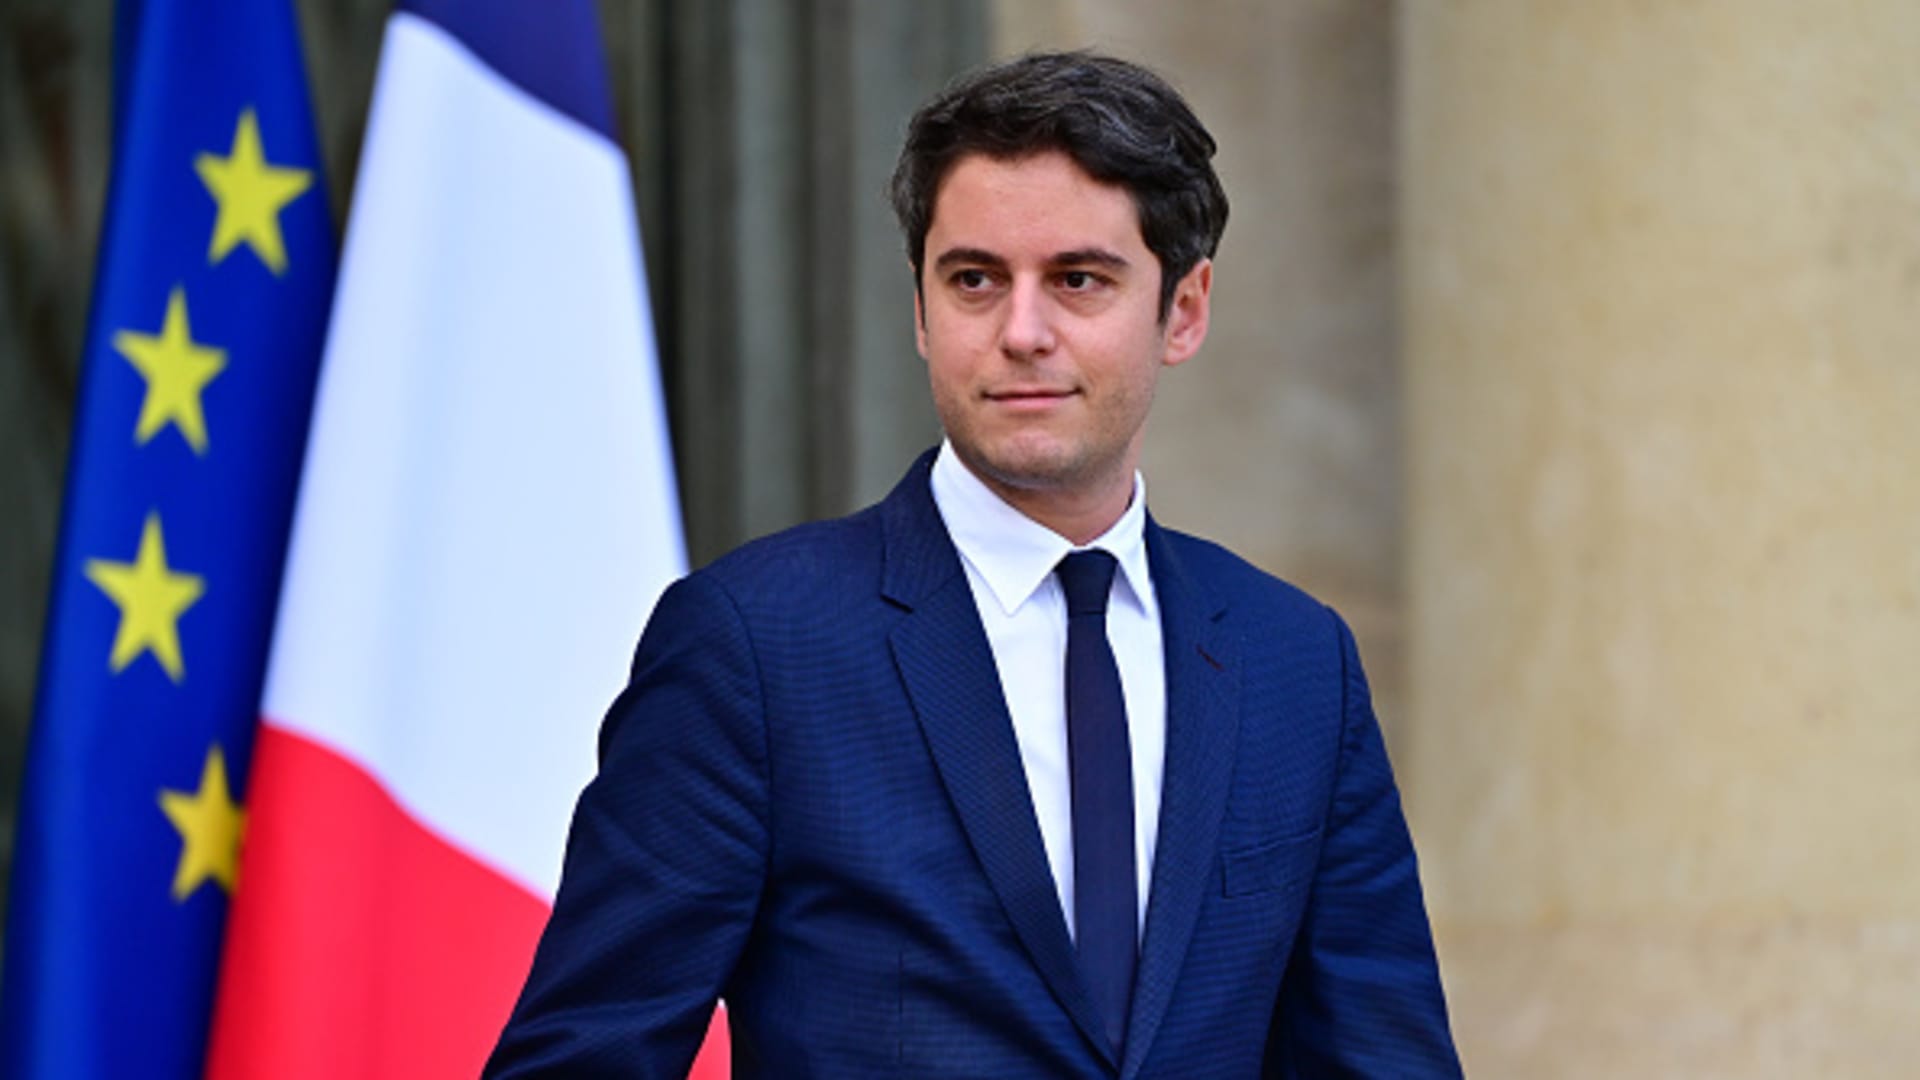 Gabriel Attal becomes the youngest French Prime Minister in modern history